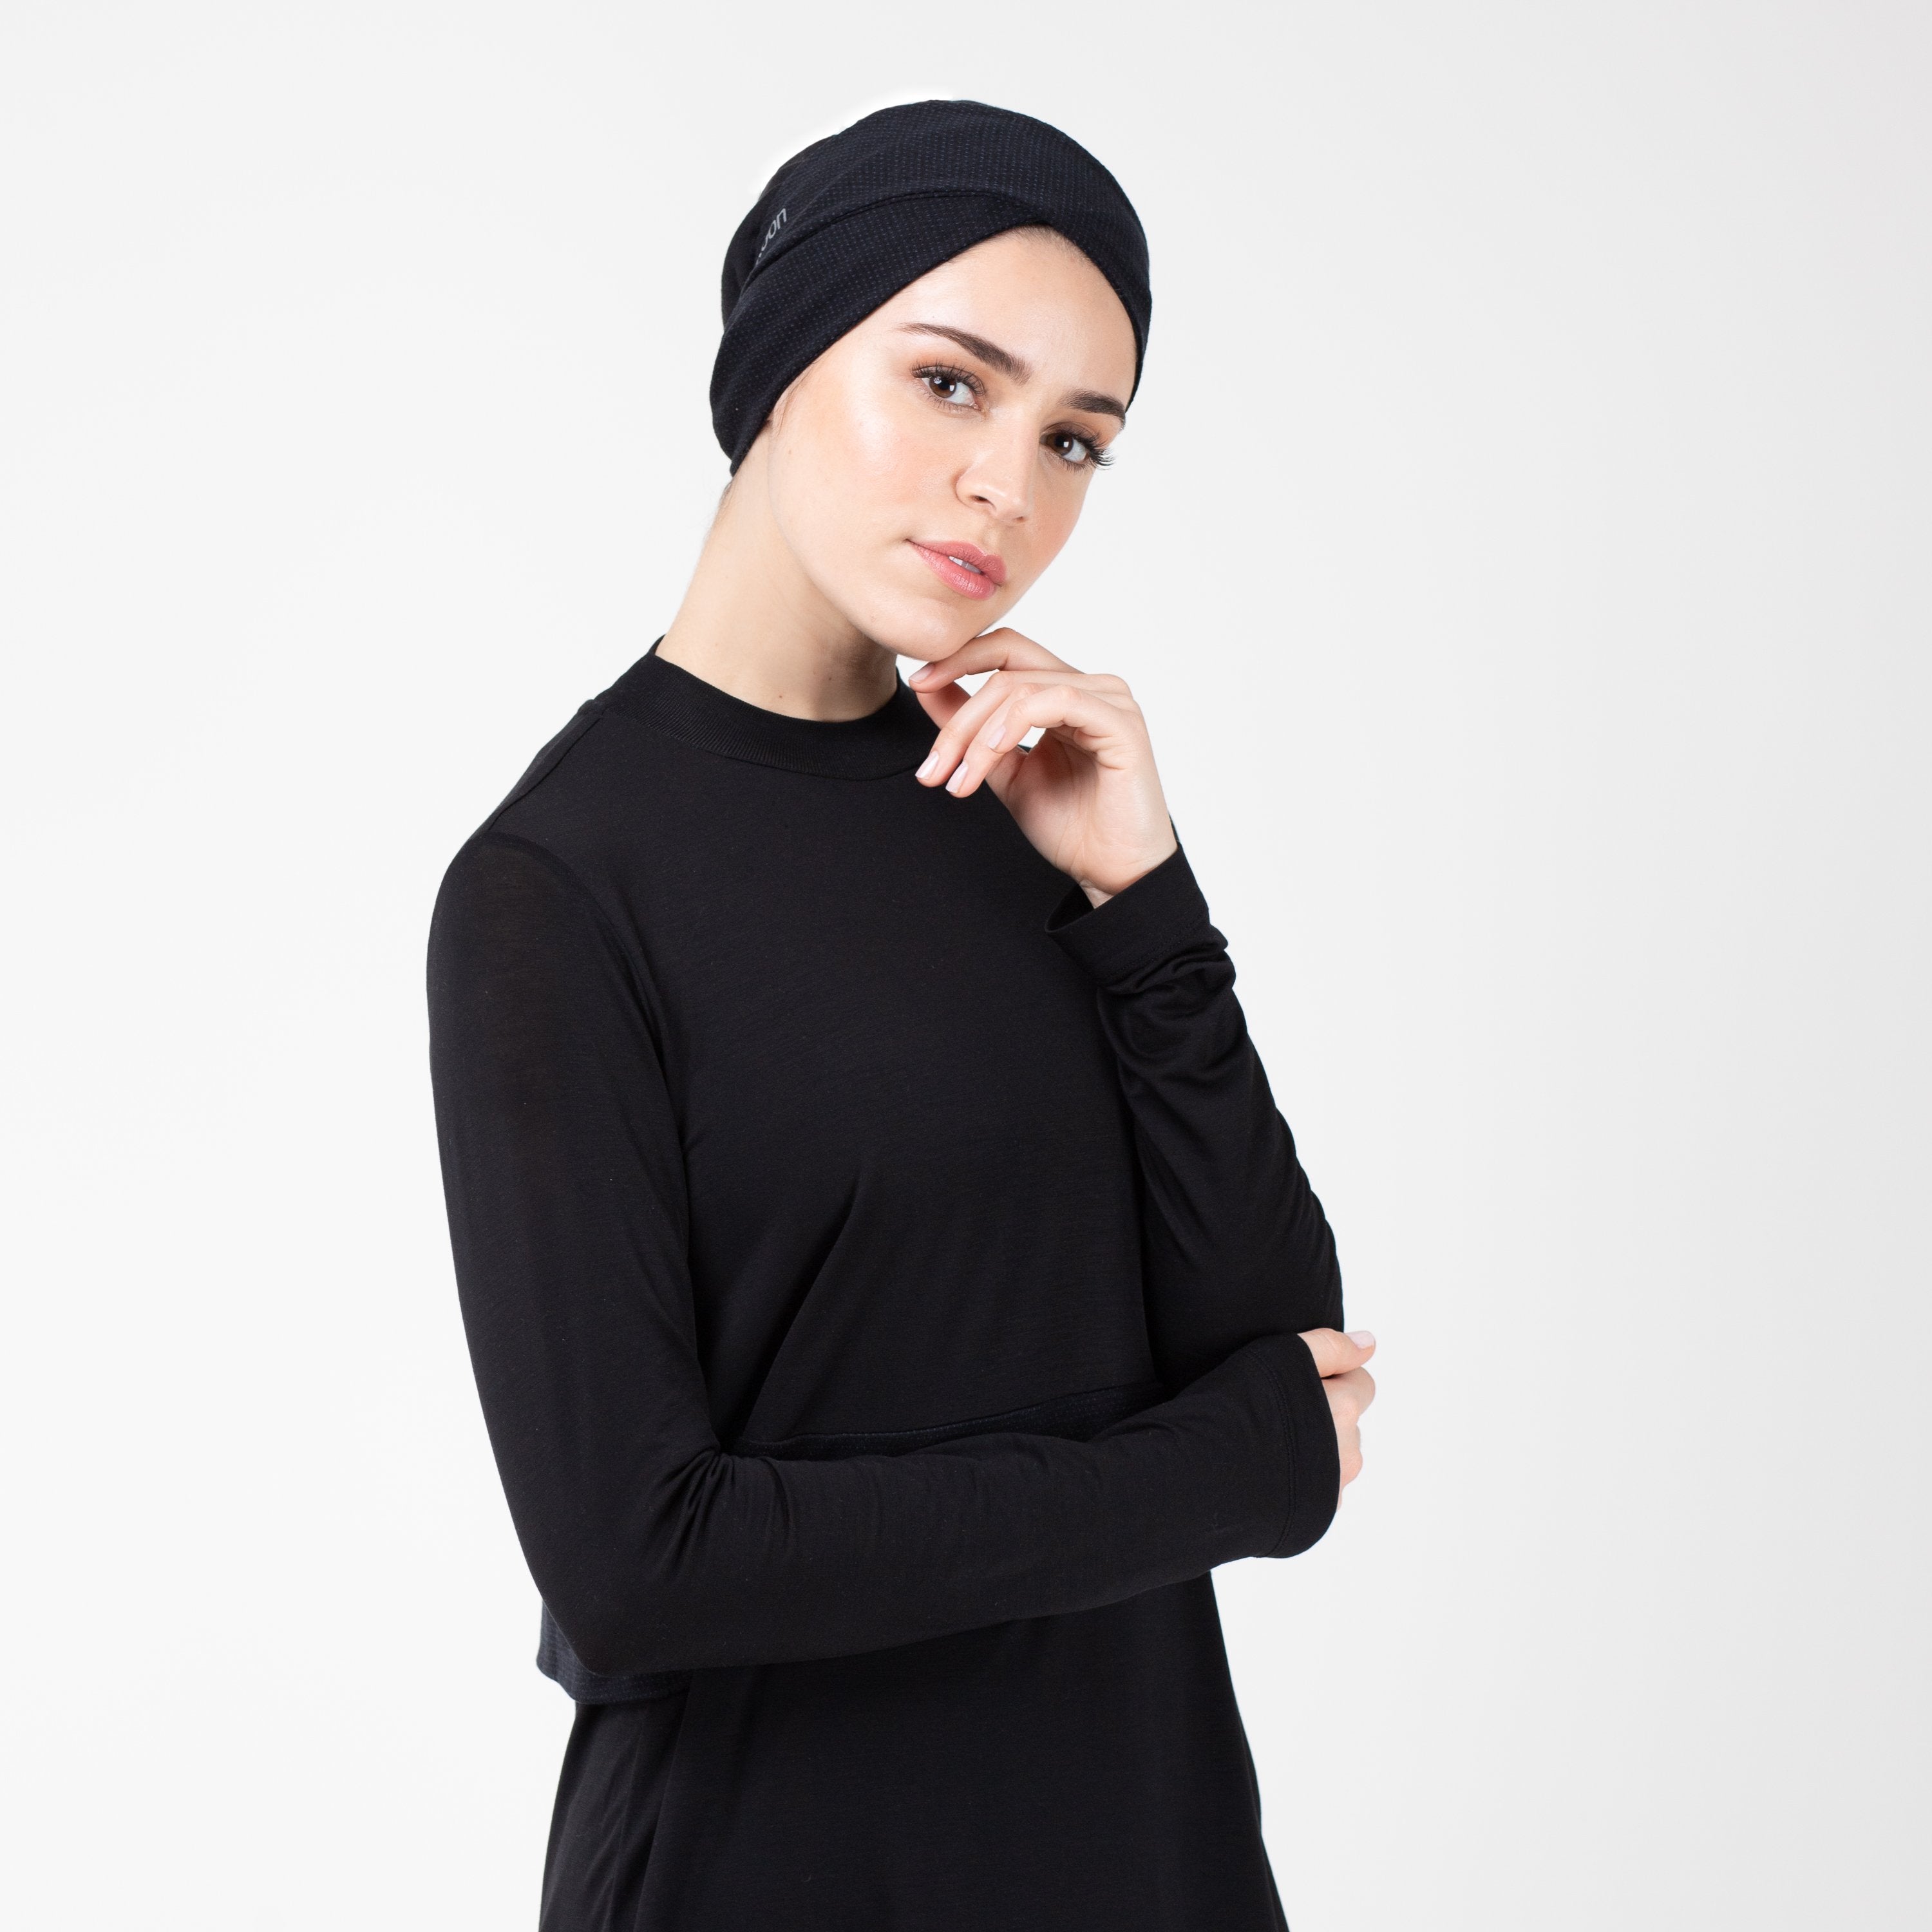 Woman facing right in a black shirt with matching black HAWA headwrap, touching her face with her left hand.